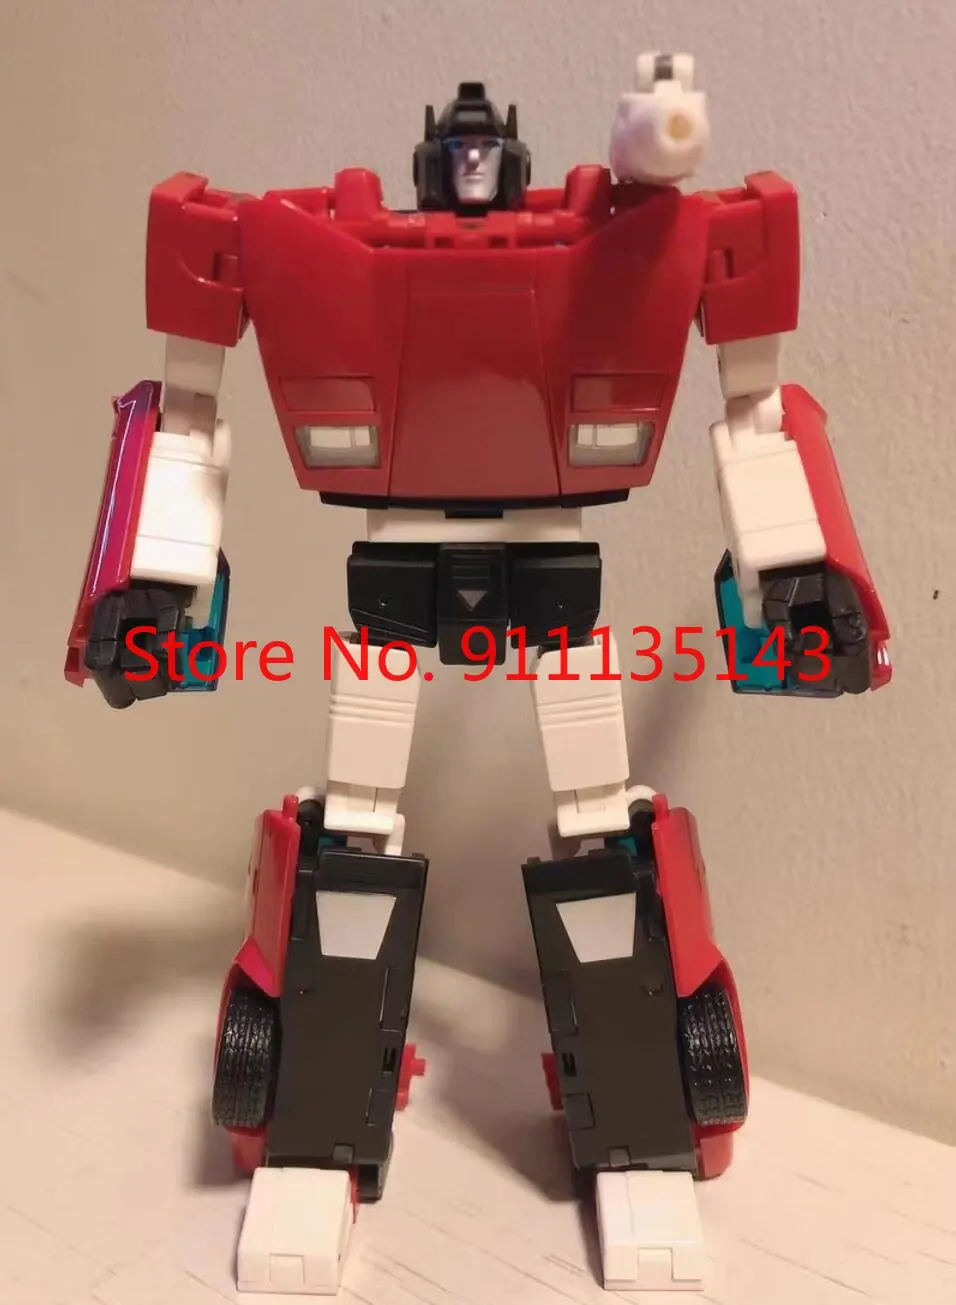 Badcube Ots-14 Warrior Steamroll Sideswipe Bc Ots14 3rd Party Transformation Toys Anime Action Figure Toy Deformed Model images - 6